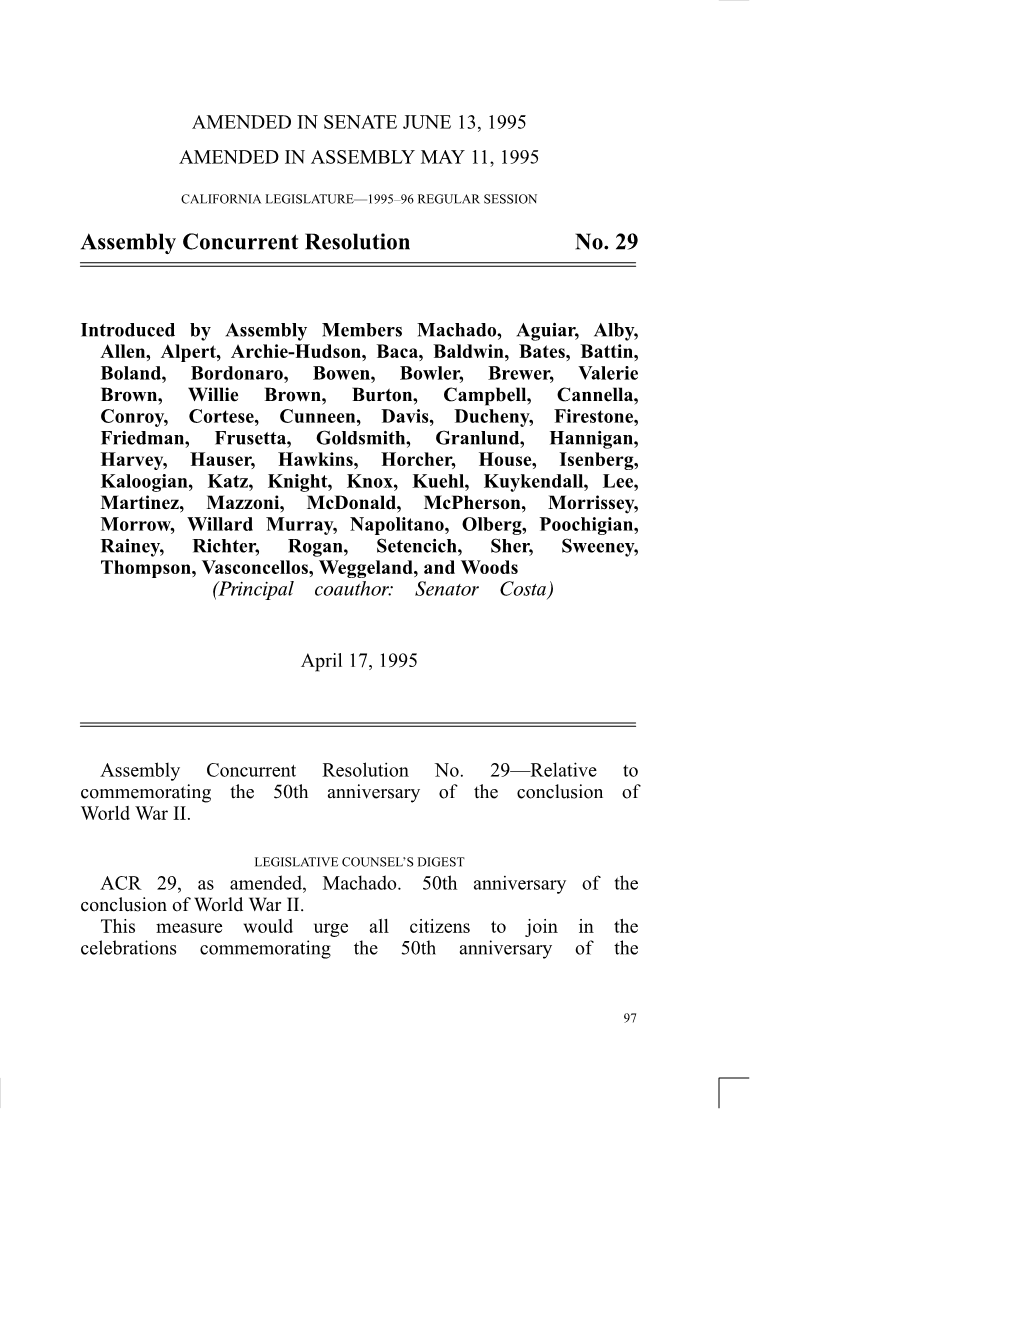 Assembly Concurrent Resolution No. 29